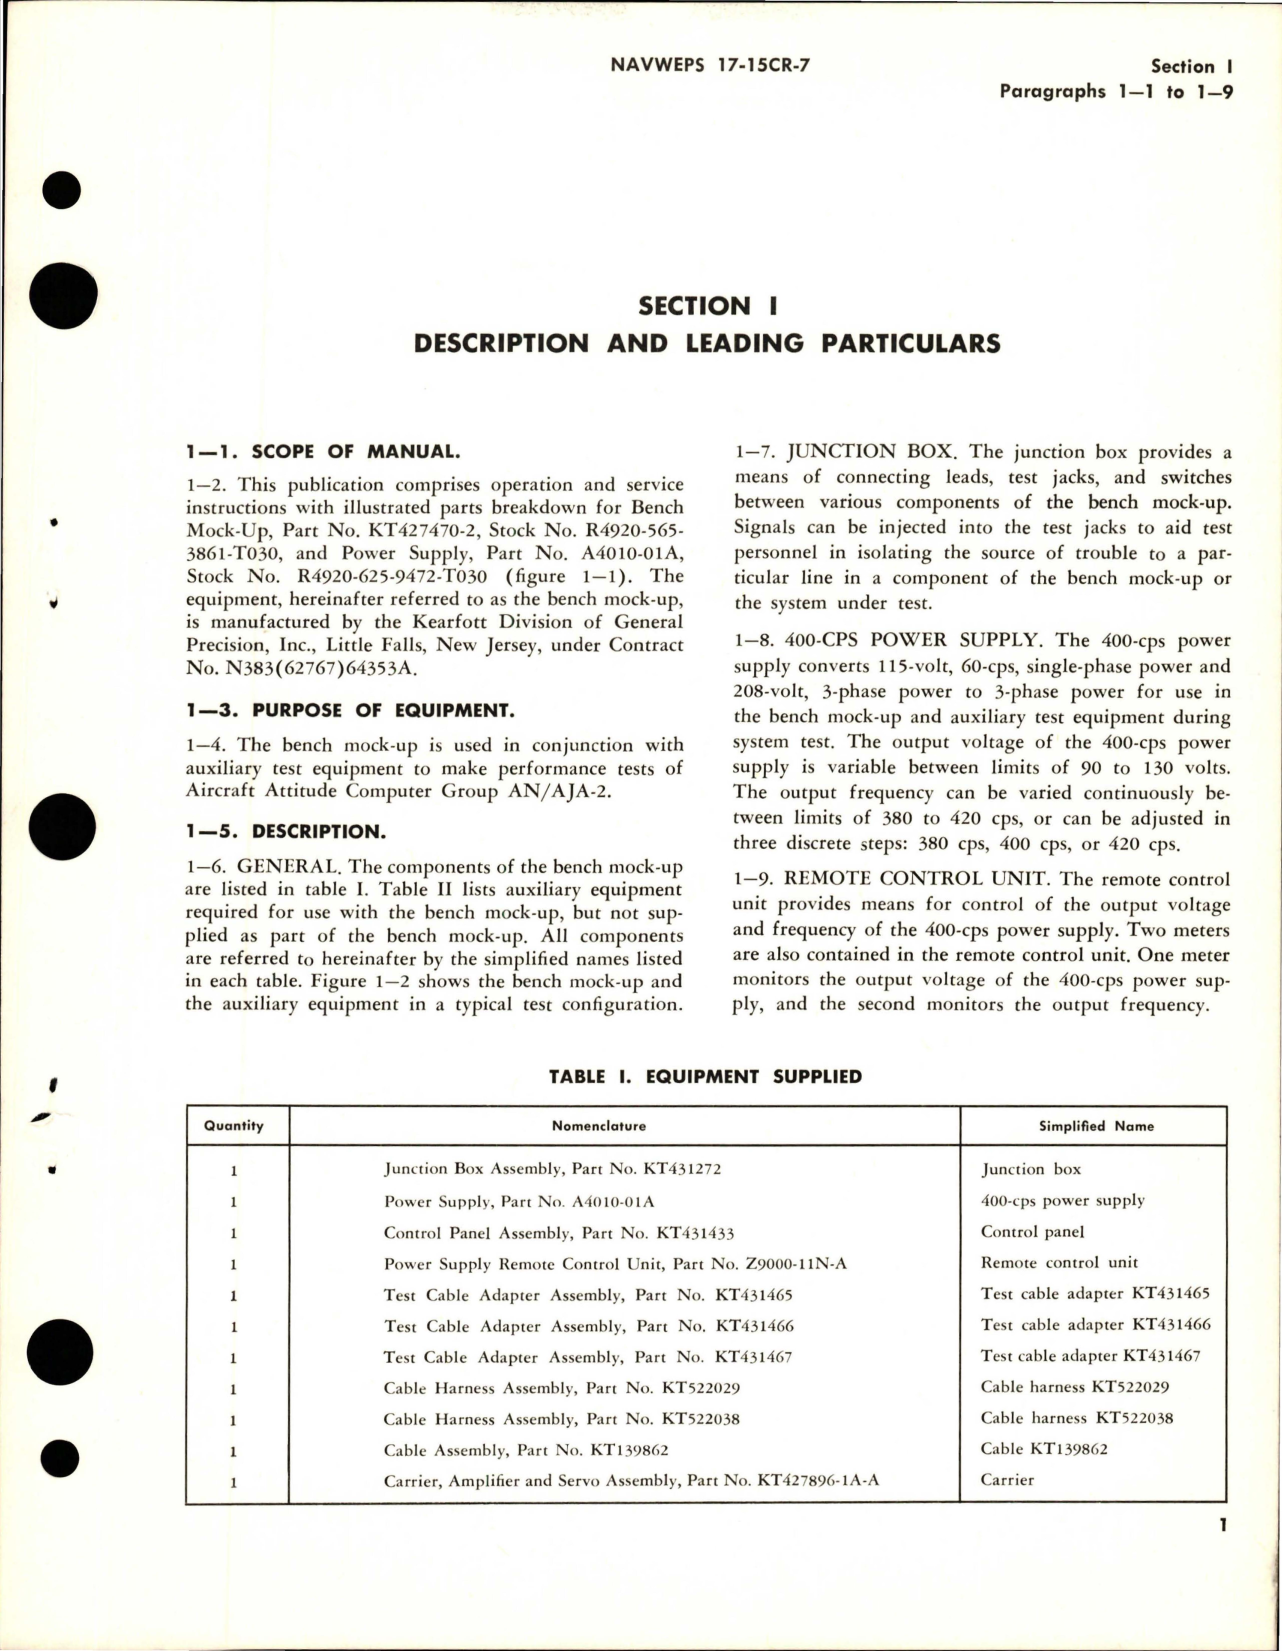 Sample page 9 from AirCorps Library document: Operation and Service Instructions with Illustrated Parts for Bench Mock Up - Part KT427470-2, and Power Supply - Part A4010-01A